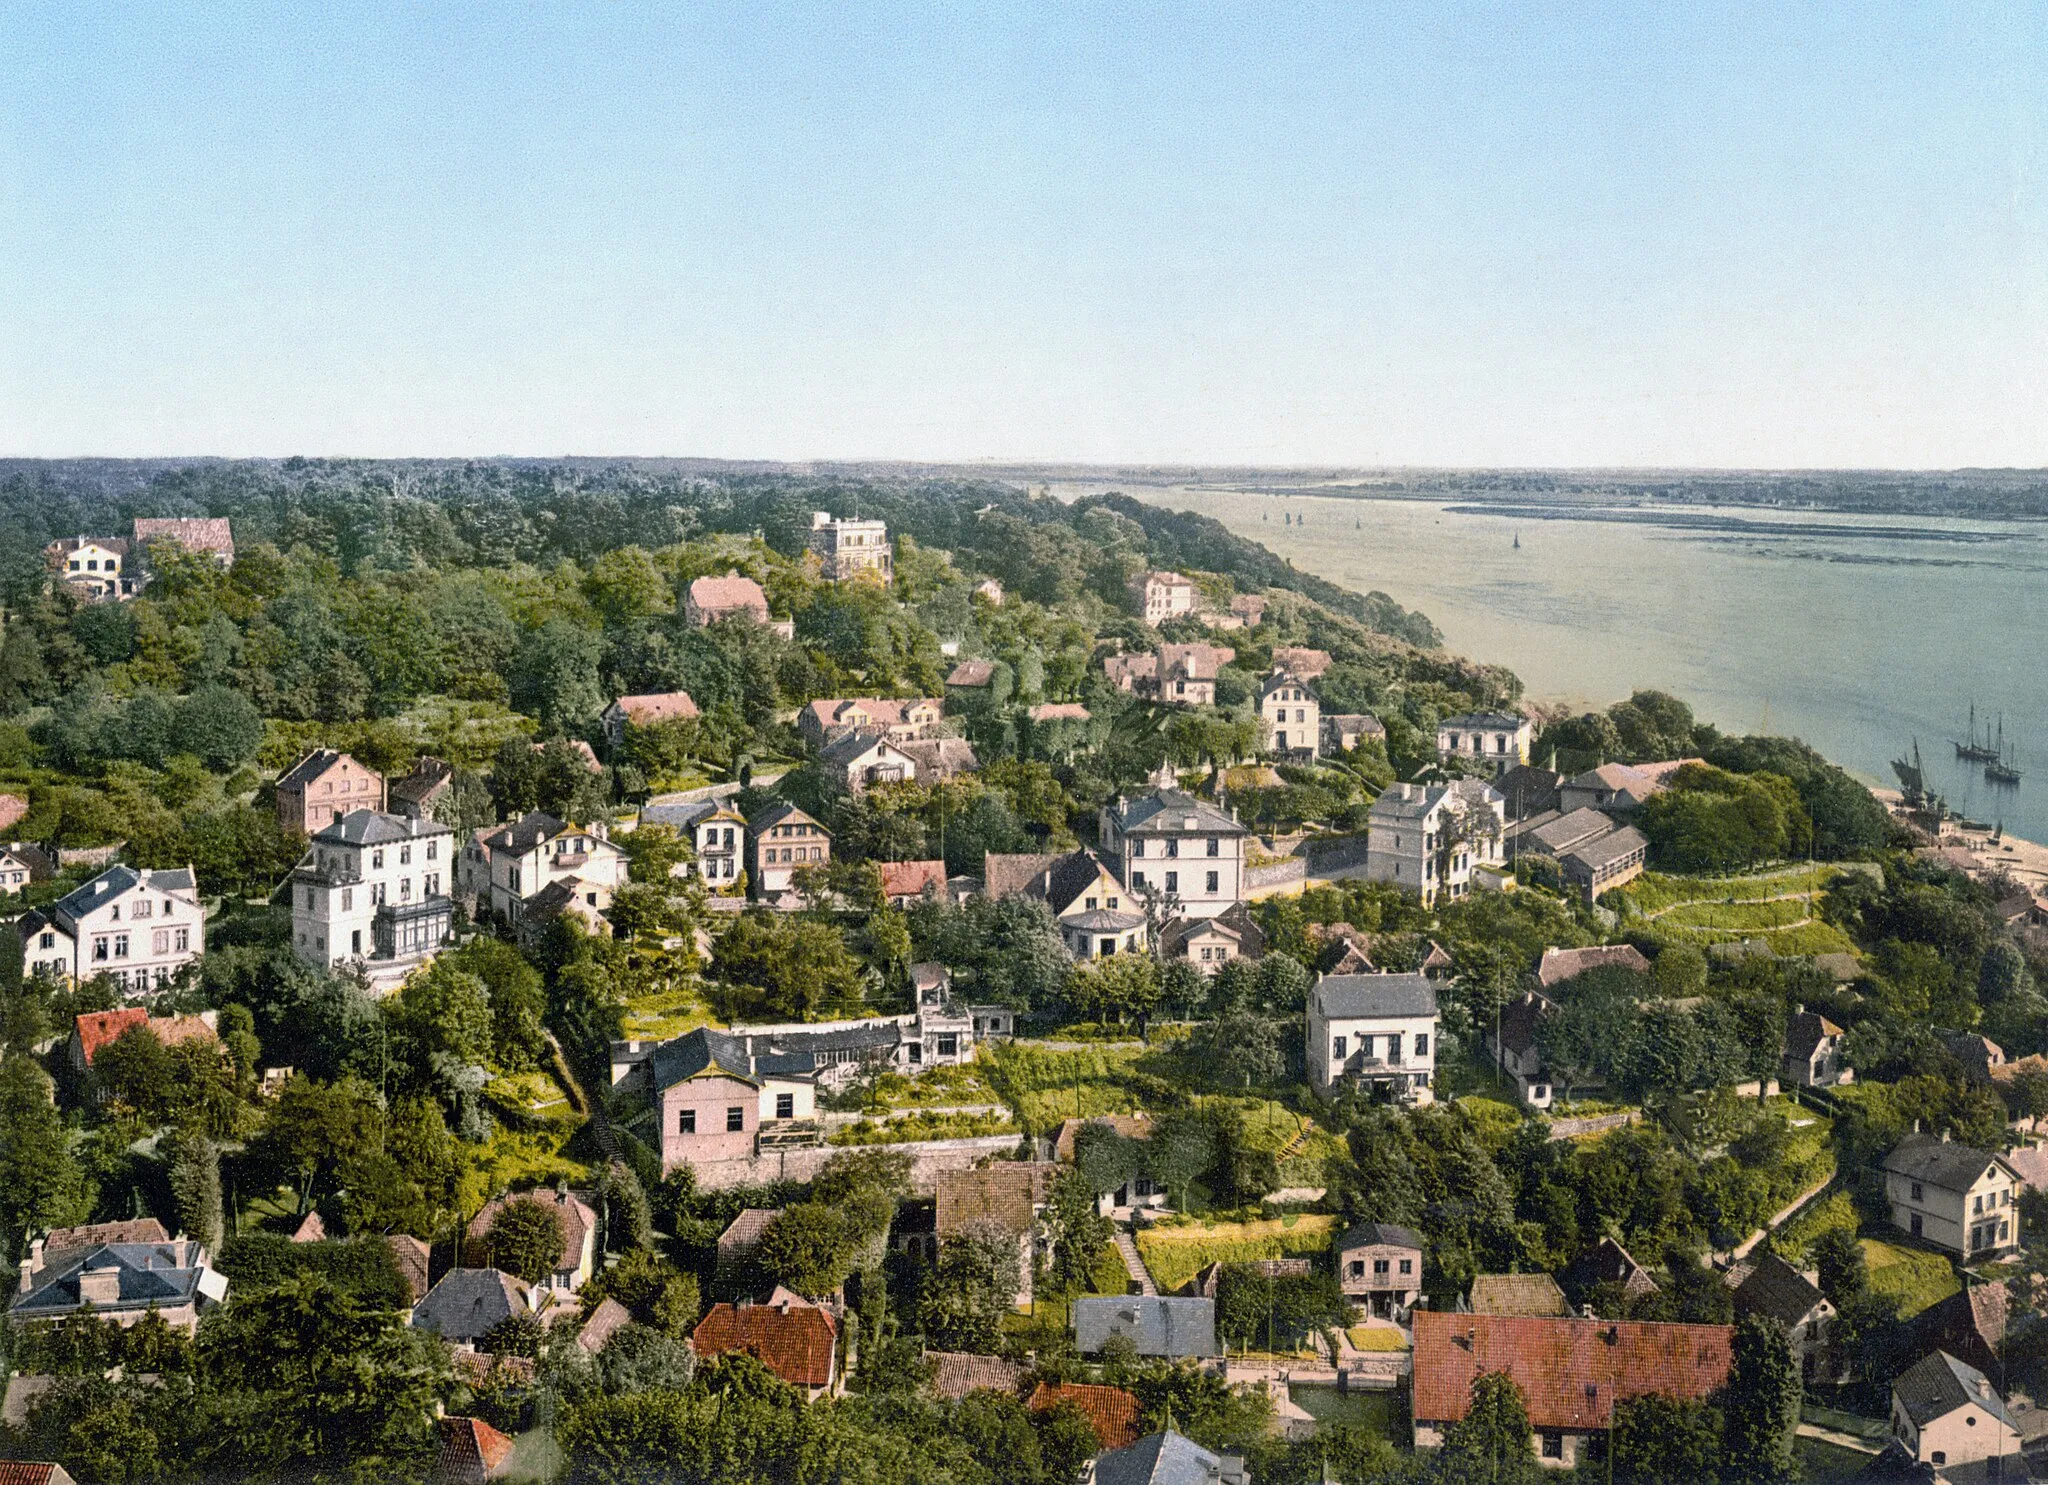 Photo showing: Blankenese, Hamburg, Germany, in 1890. Hamburg suburb of Blankenese on the lower Elbe River (image has been slightly rotated from the original)